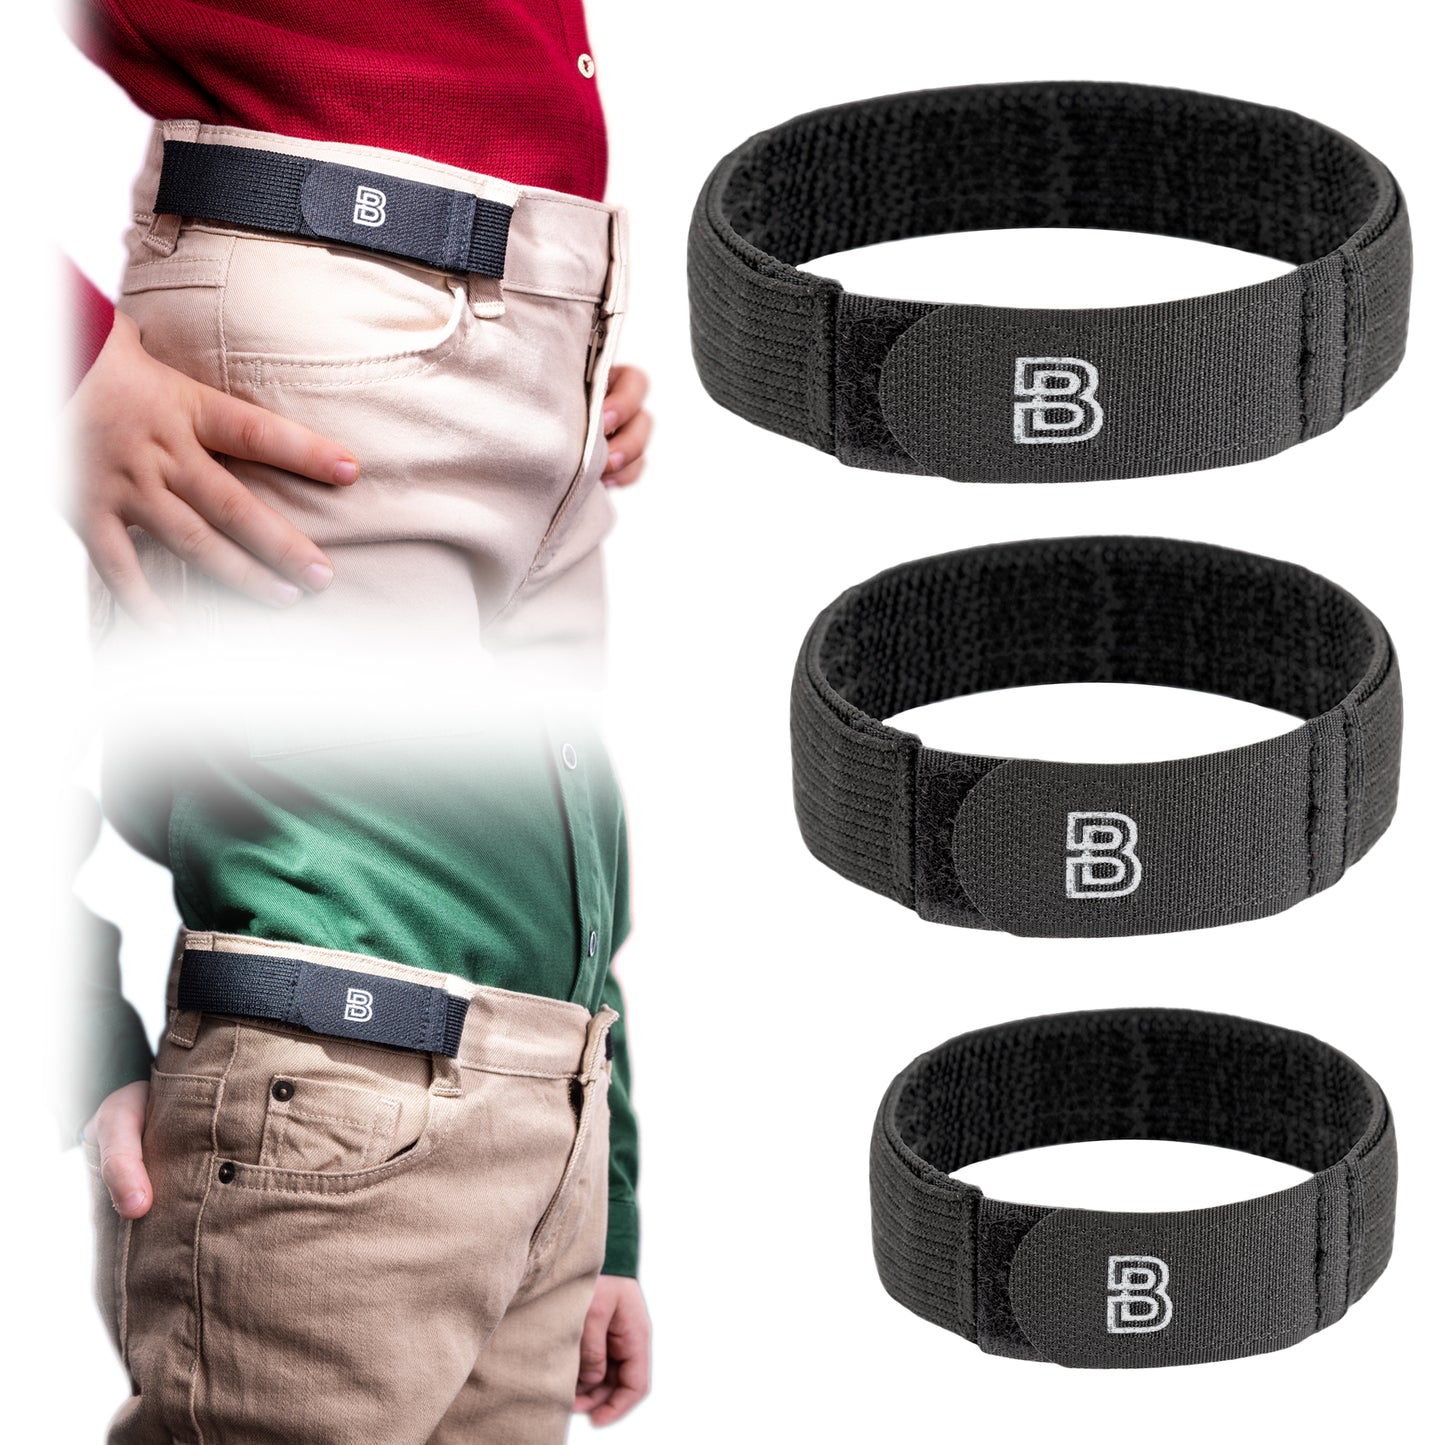 2 BeltBro for Kids - DISCOUNT TODAY